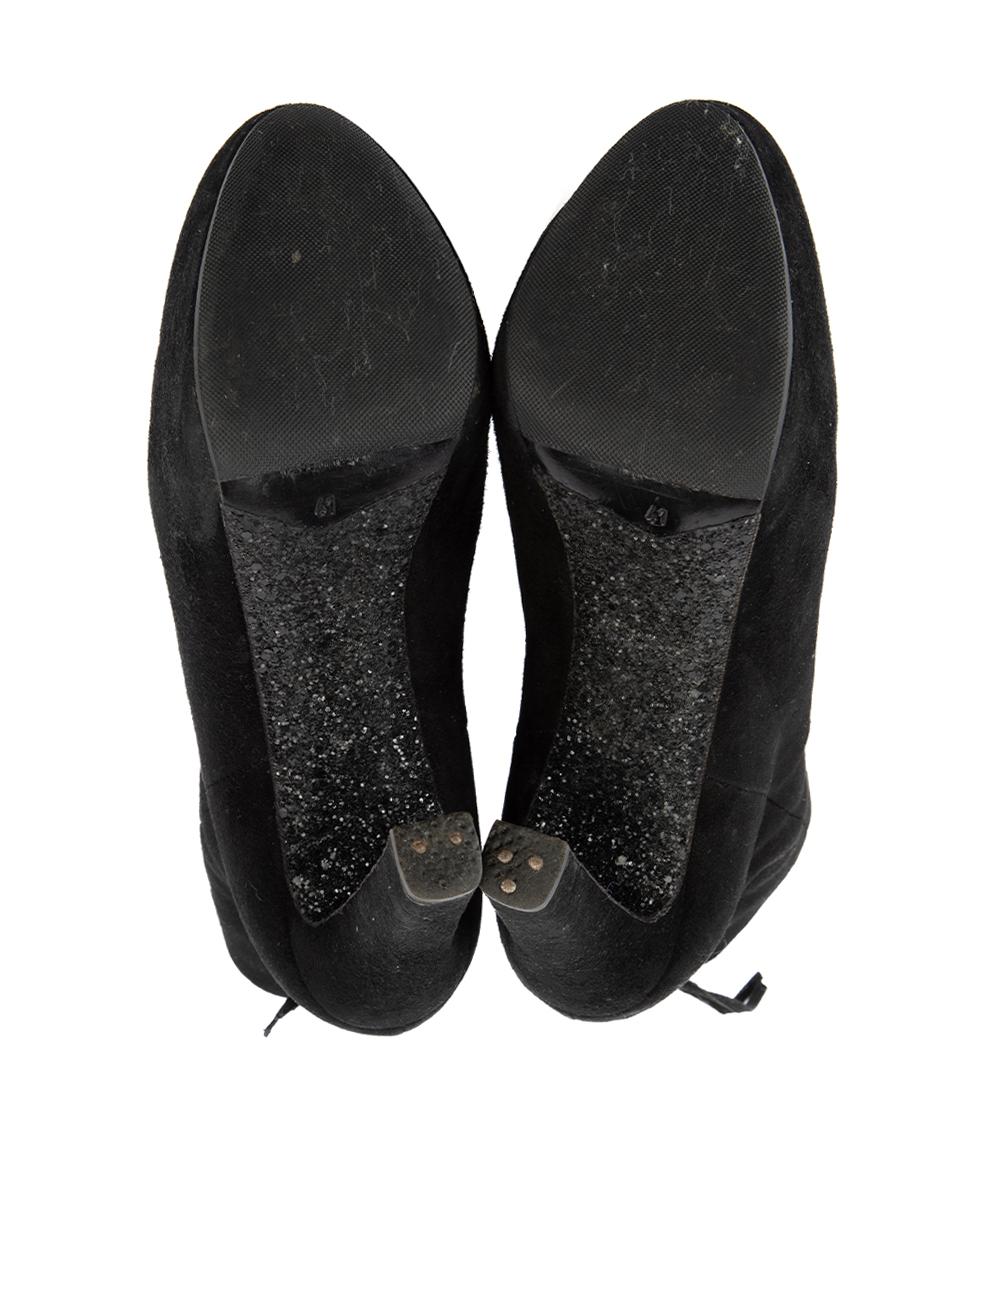 Pre-Loved Miu Miu Women's Black Suede Ankle Boots with Glitter Sole For Sale 1